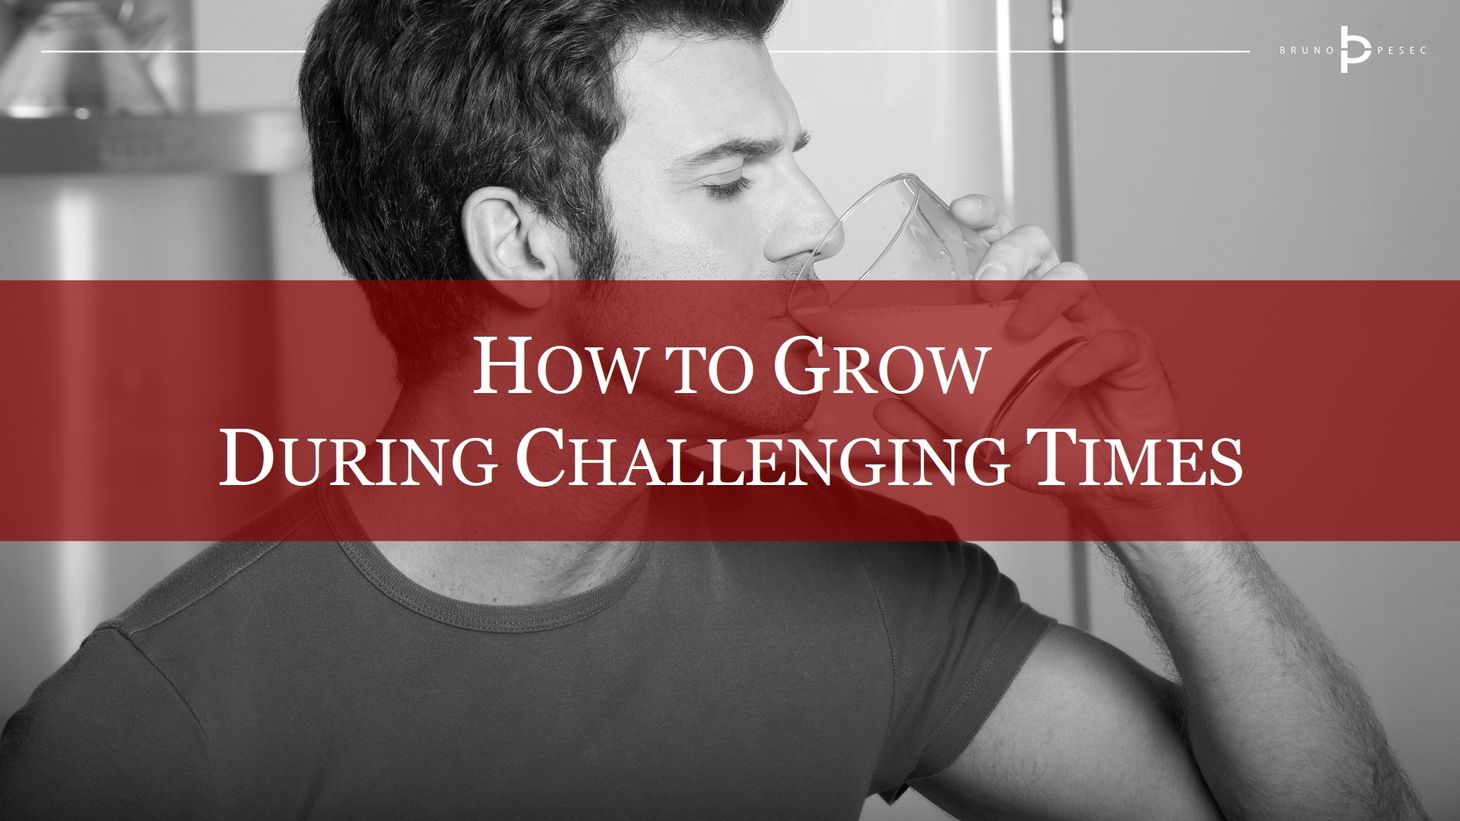 How to grow during challenging times